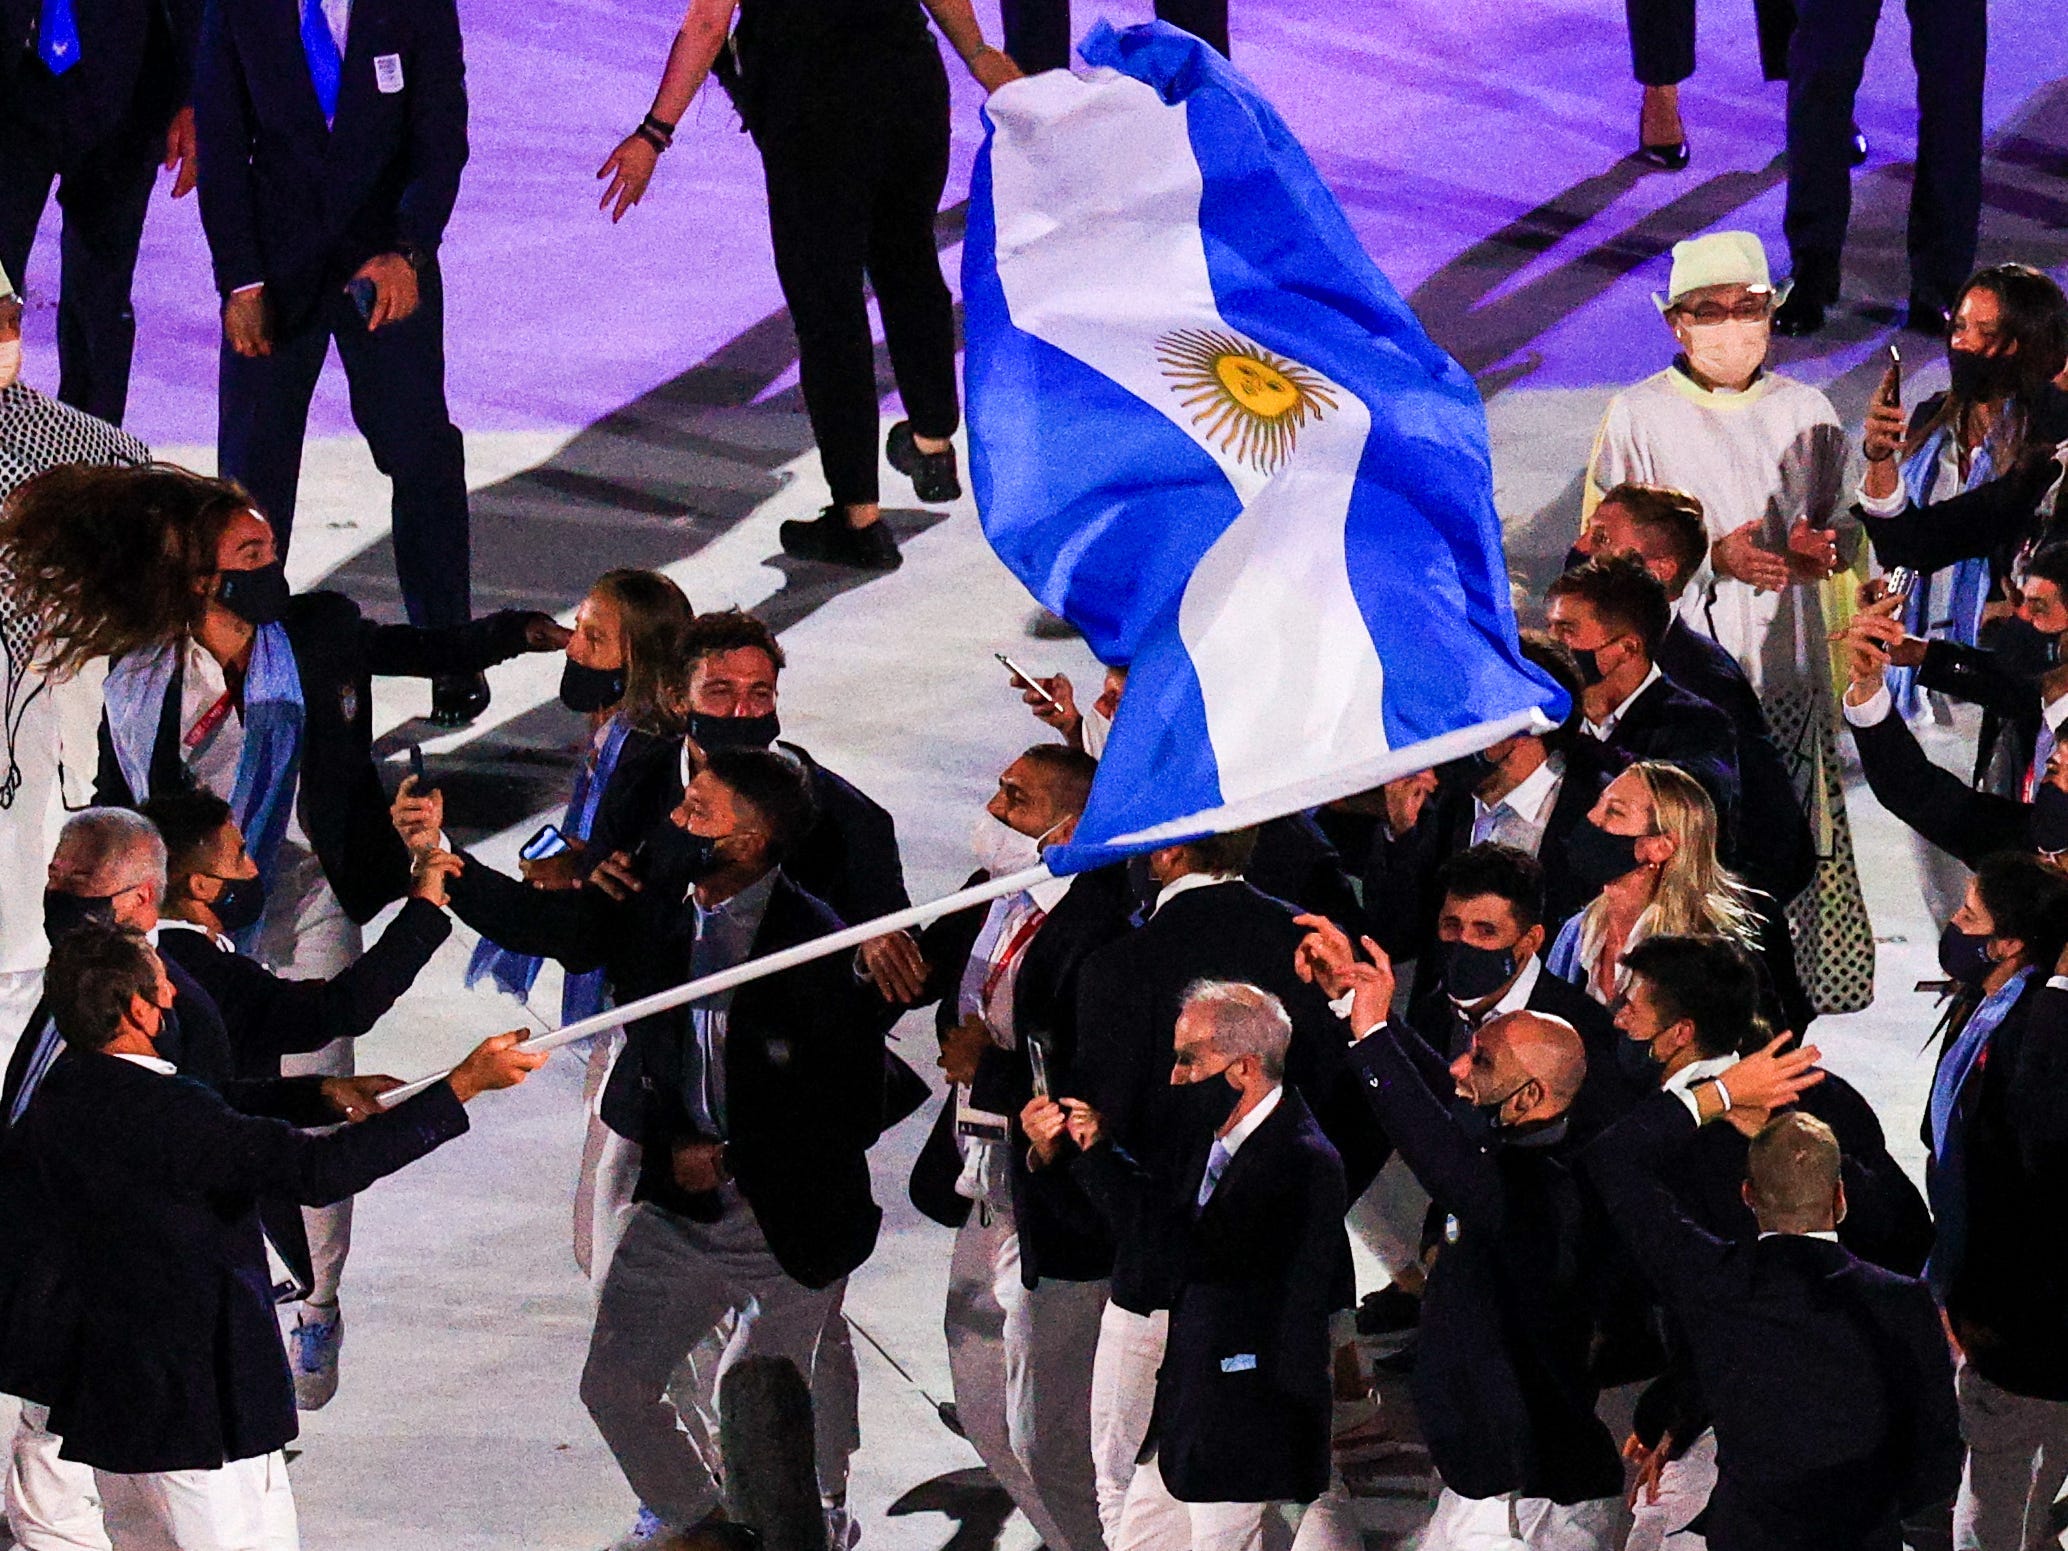 The Argentine athletes brought the party to the Olympic opening ceremony